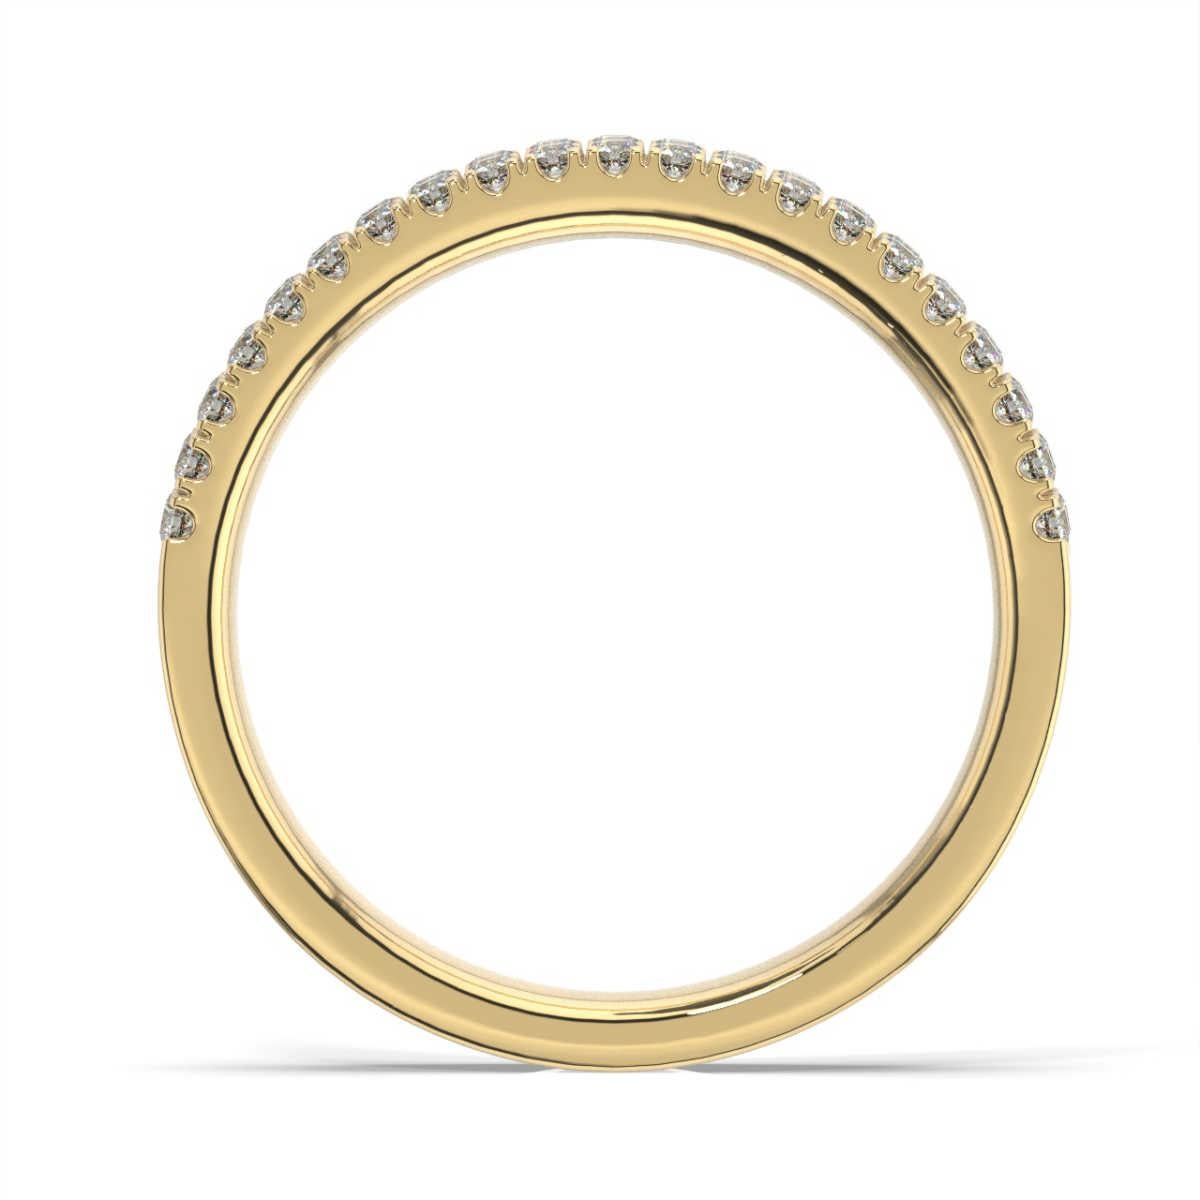 This band features two rows of Micro- Prong-set round brilliant diamonds. Experience the difference

Product details: 

Center Gemstone Color: WHITE
Side Gemstone Type: NATURAL DIAMOND
Side Gemstone Shape: ROUND
Metal: 18K Yellow Gold
Metal Weight: